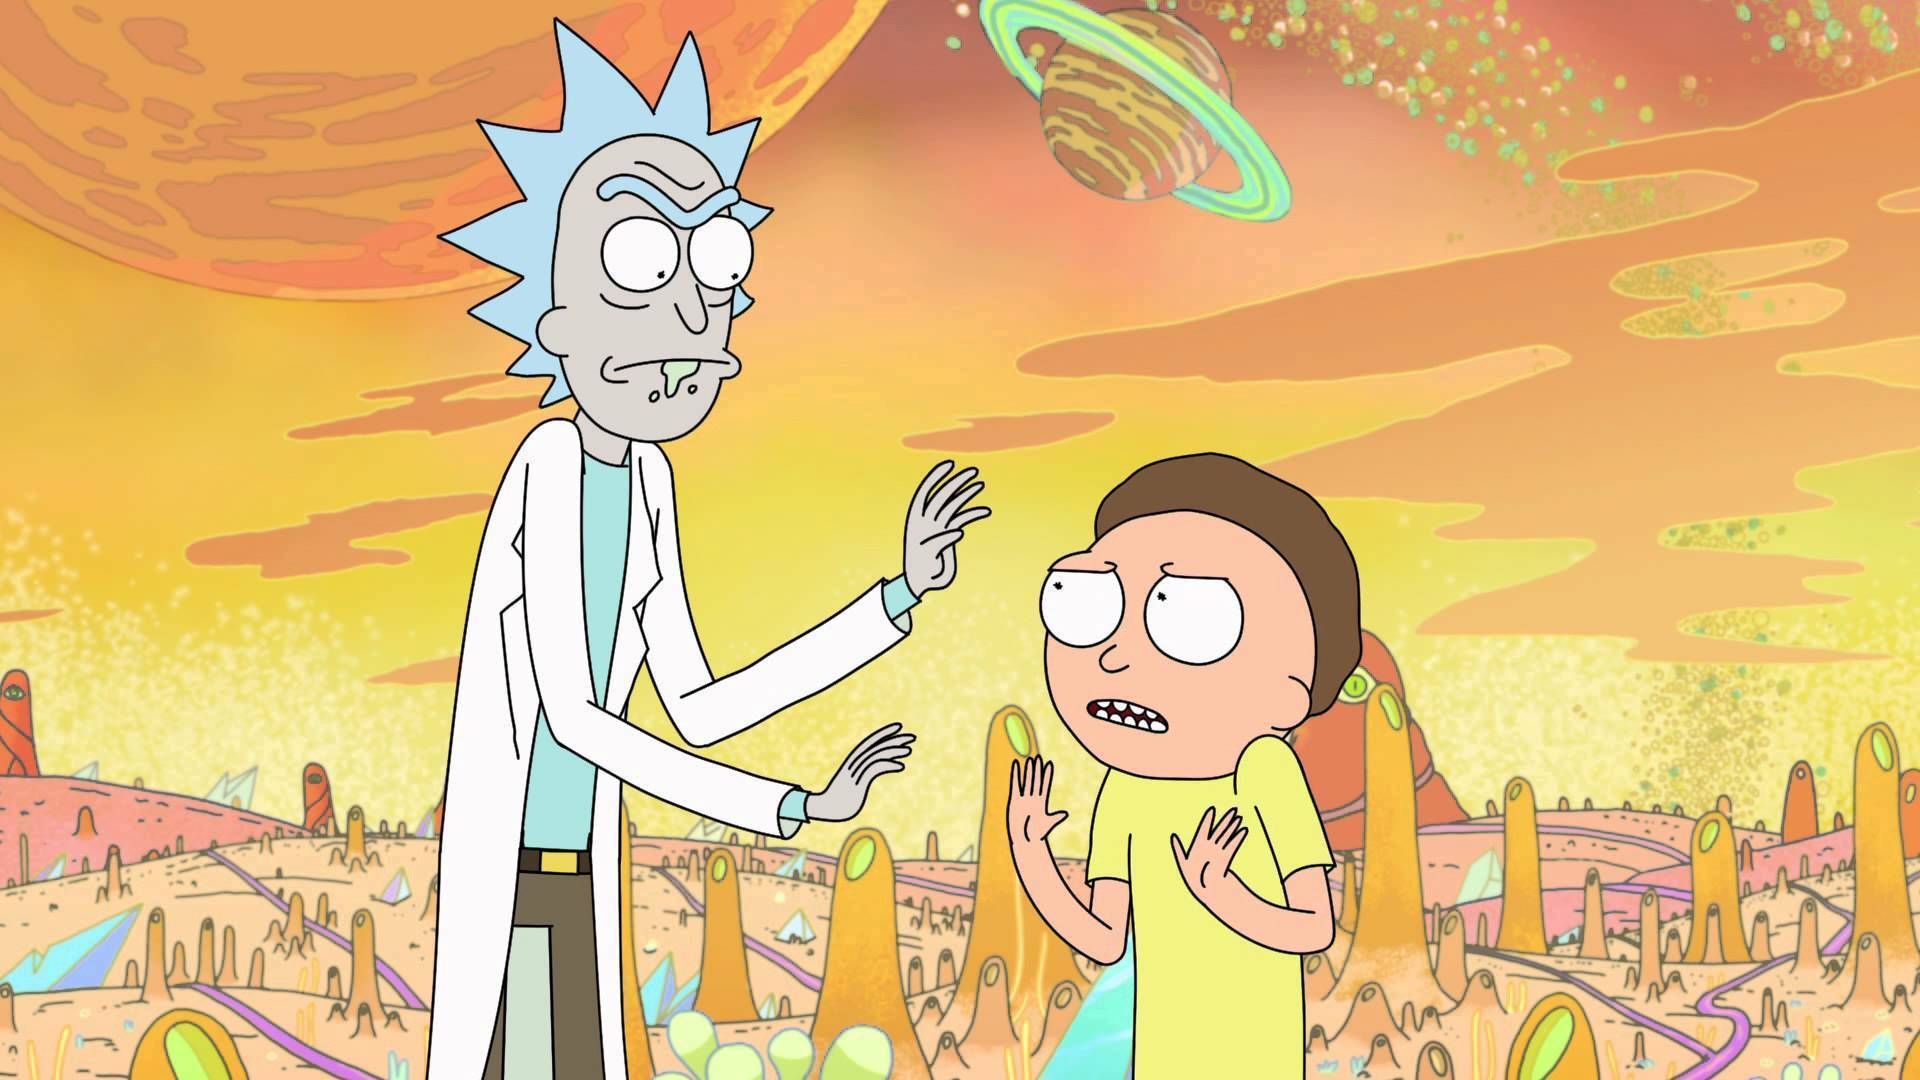 Rick and Morty Season 4 Episode 6 Release Date and Spoilers